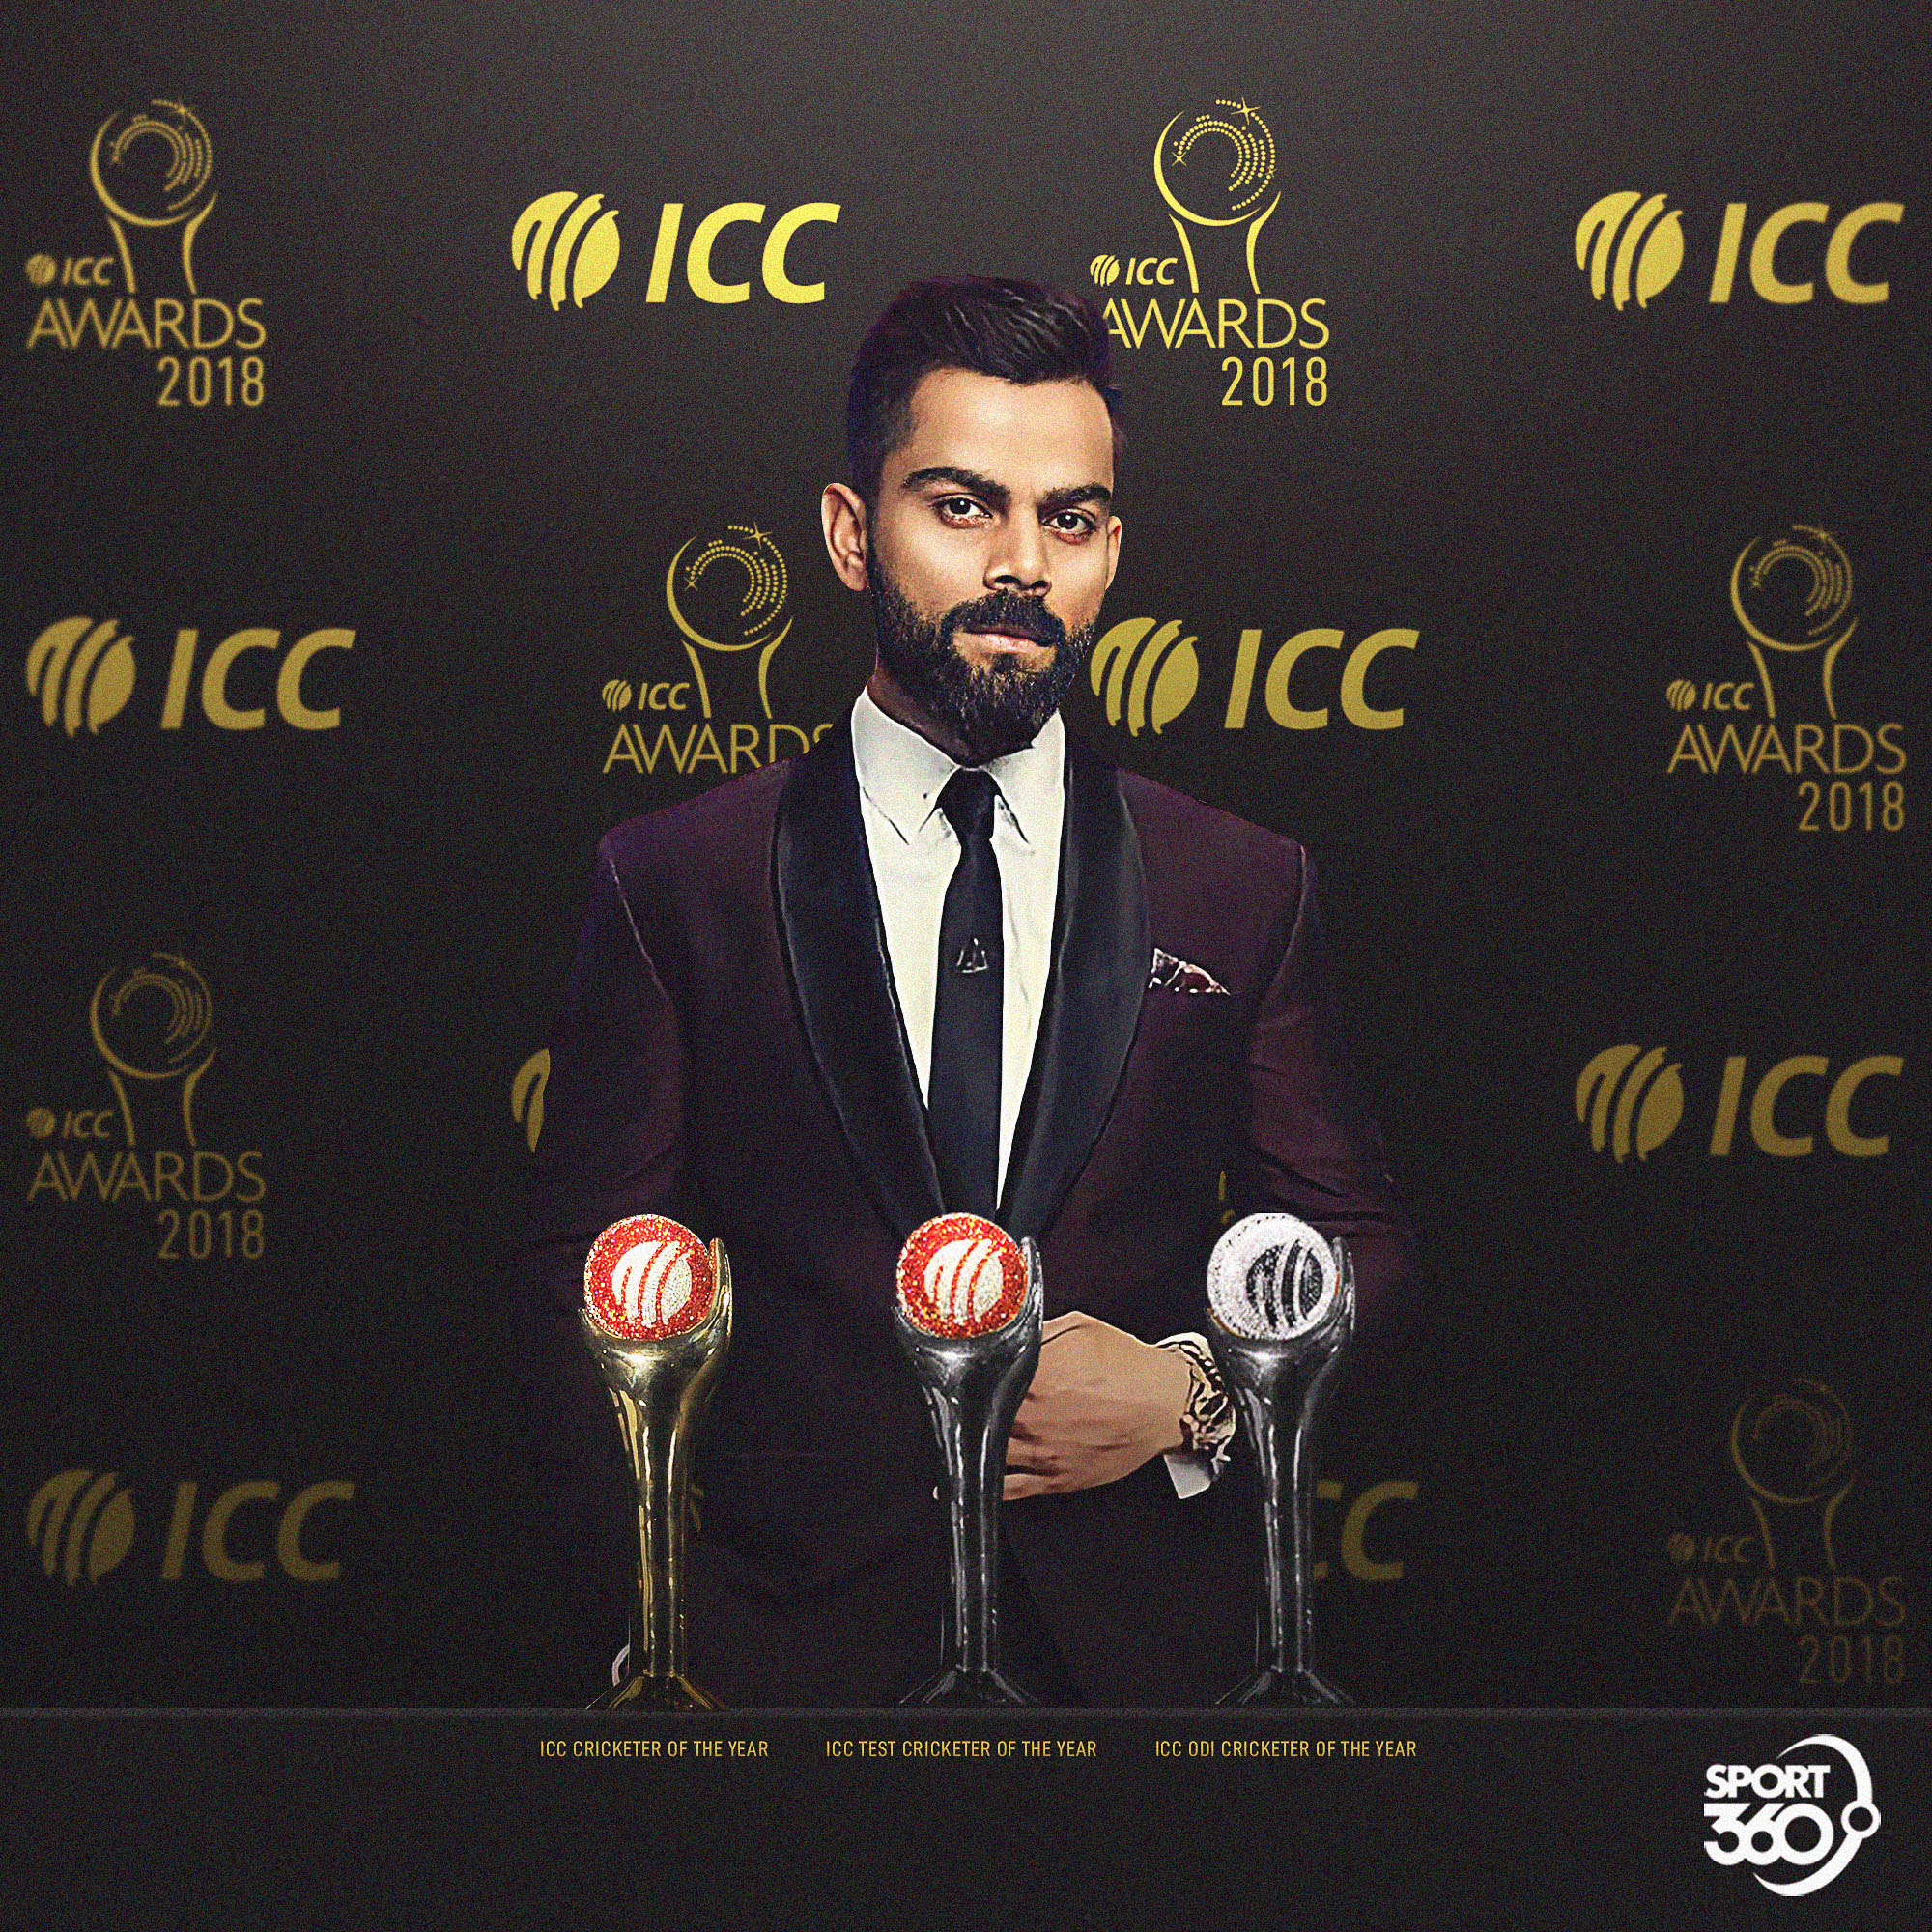 Sport360° on Twitter: "Virat Kohli remains the only player to sweep all  major ICC awards in the same year 🏆🏆🏆 ✓ ICC Men's Cricketer of the Year  ✓ ICC Men's Test Cricketer